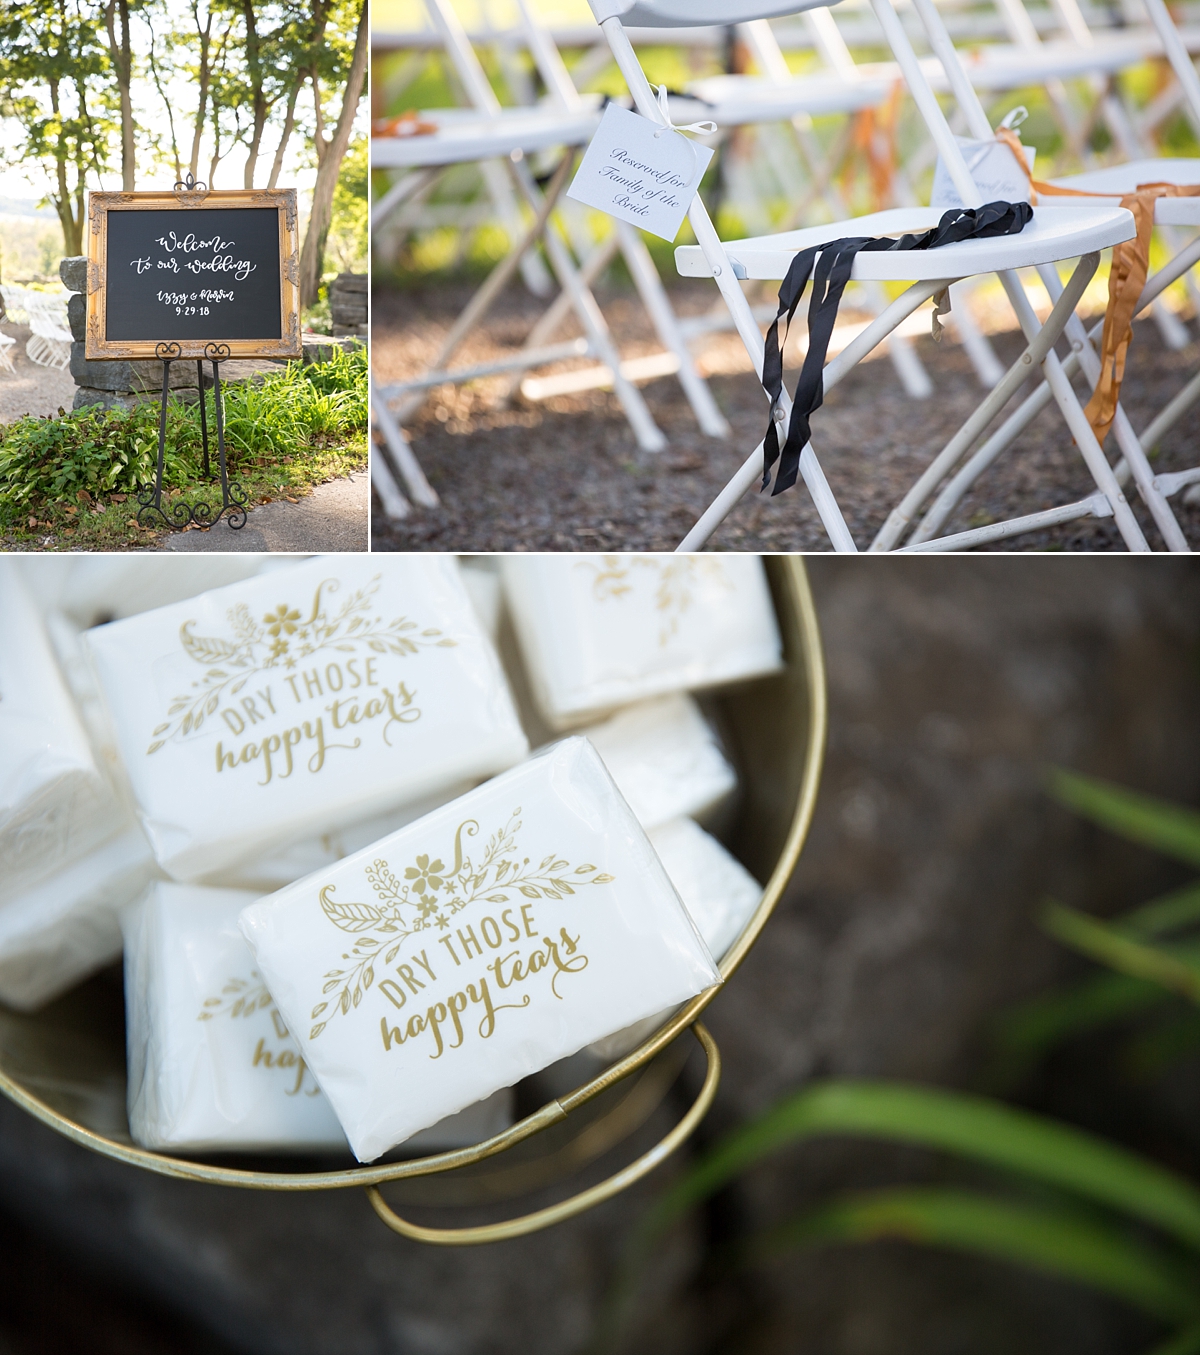 beardslee castle, little falls, ny, sarah heppell photography, handwritten welcome to our wedding ceremony sign, dry those happy tears wedding ceremony tissues, wedding ceremony ribbon wands, reserved seats at wedding ceremony